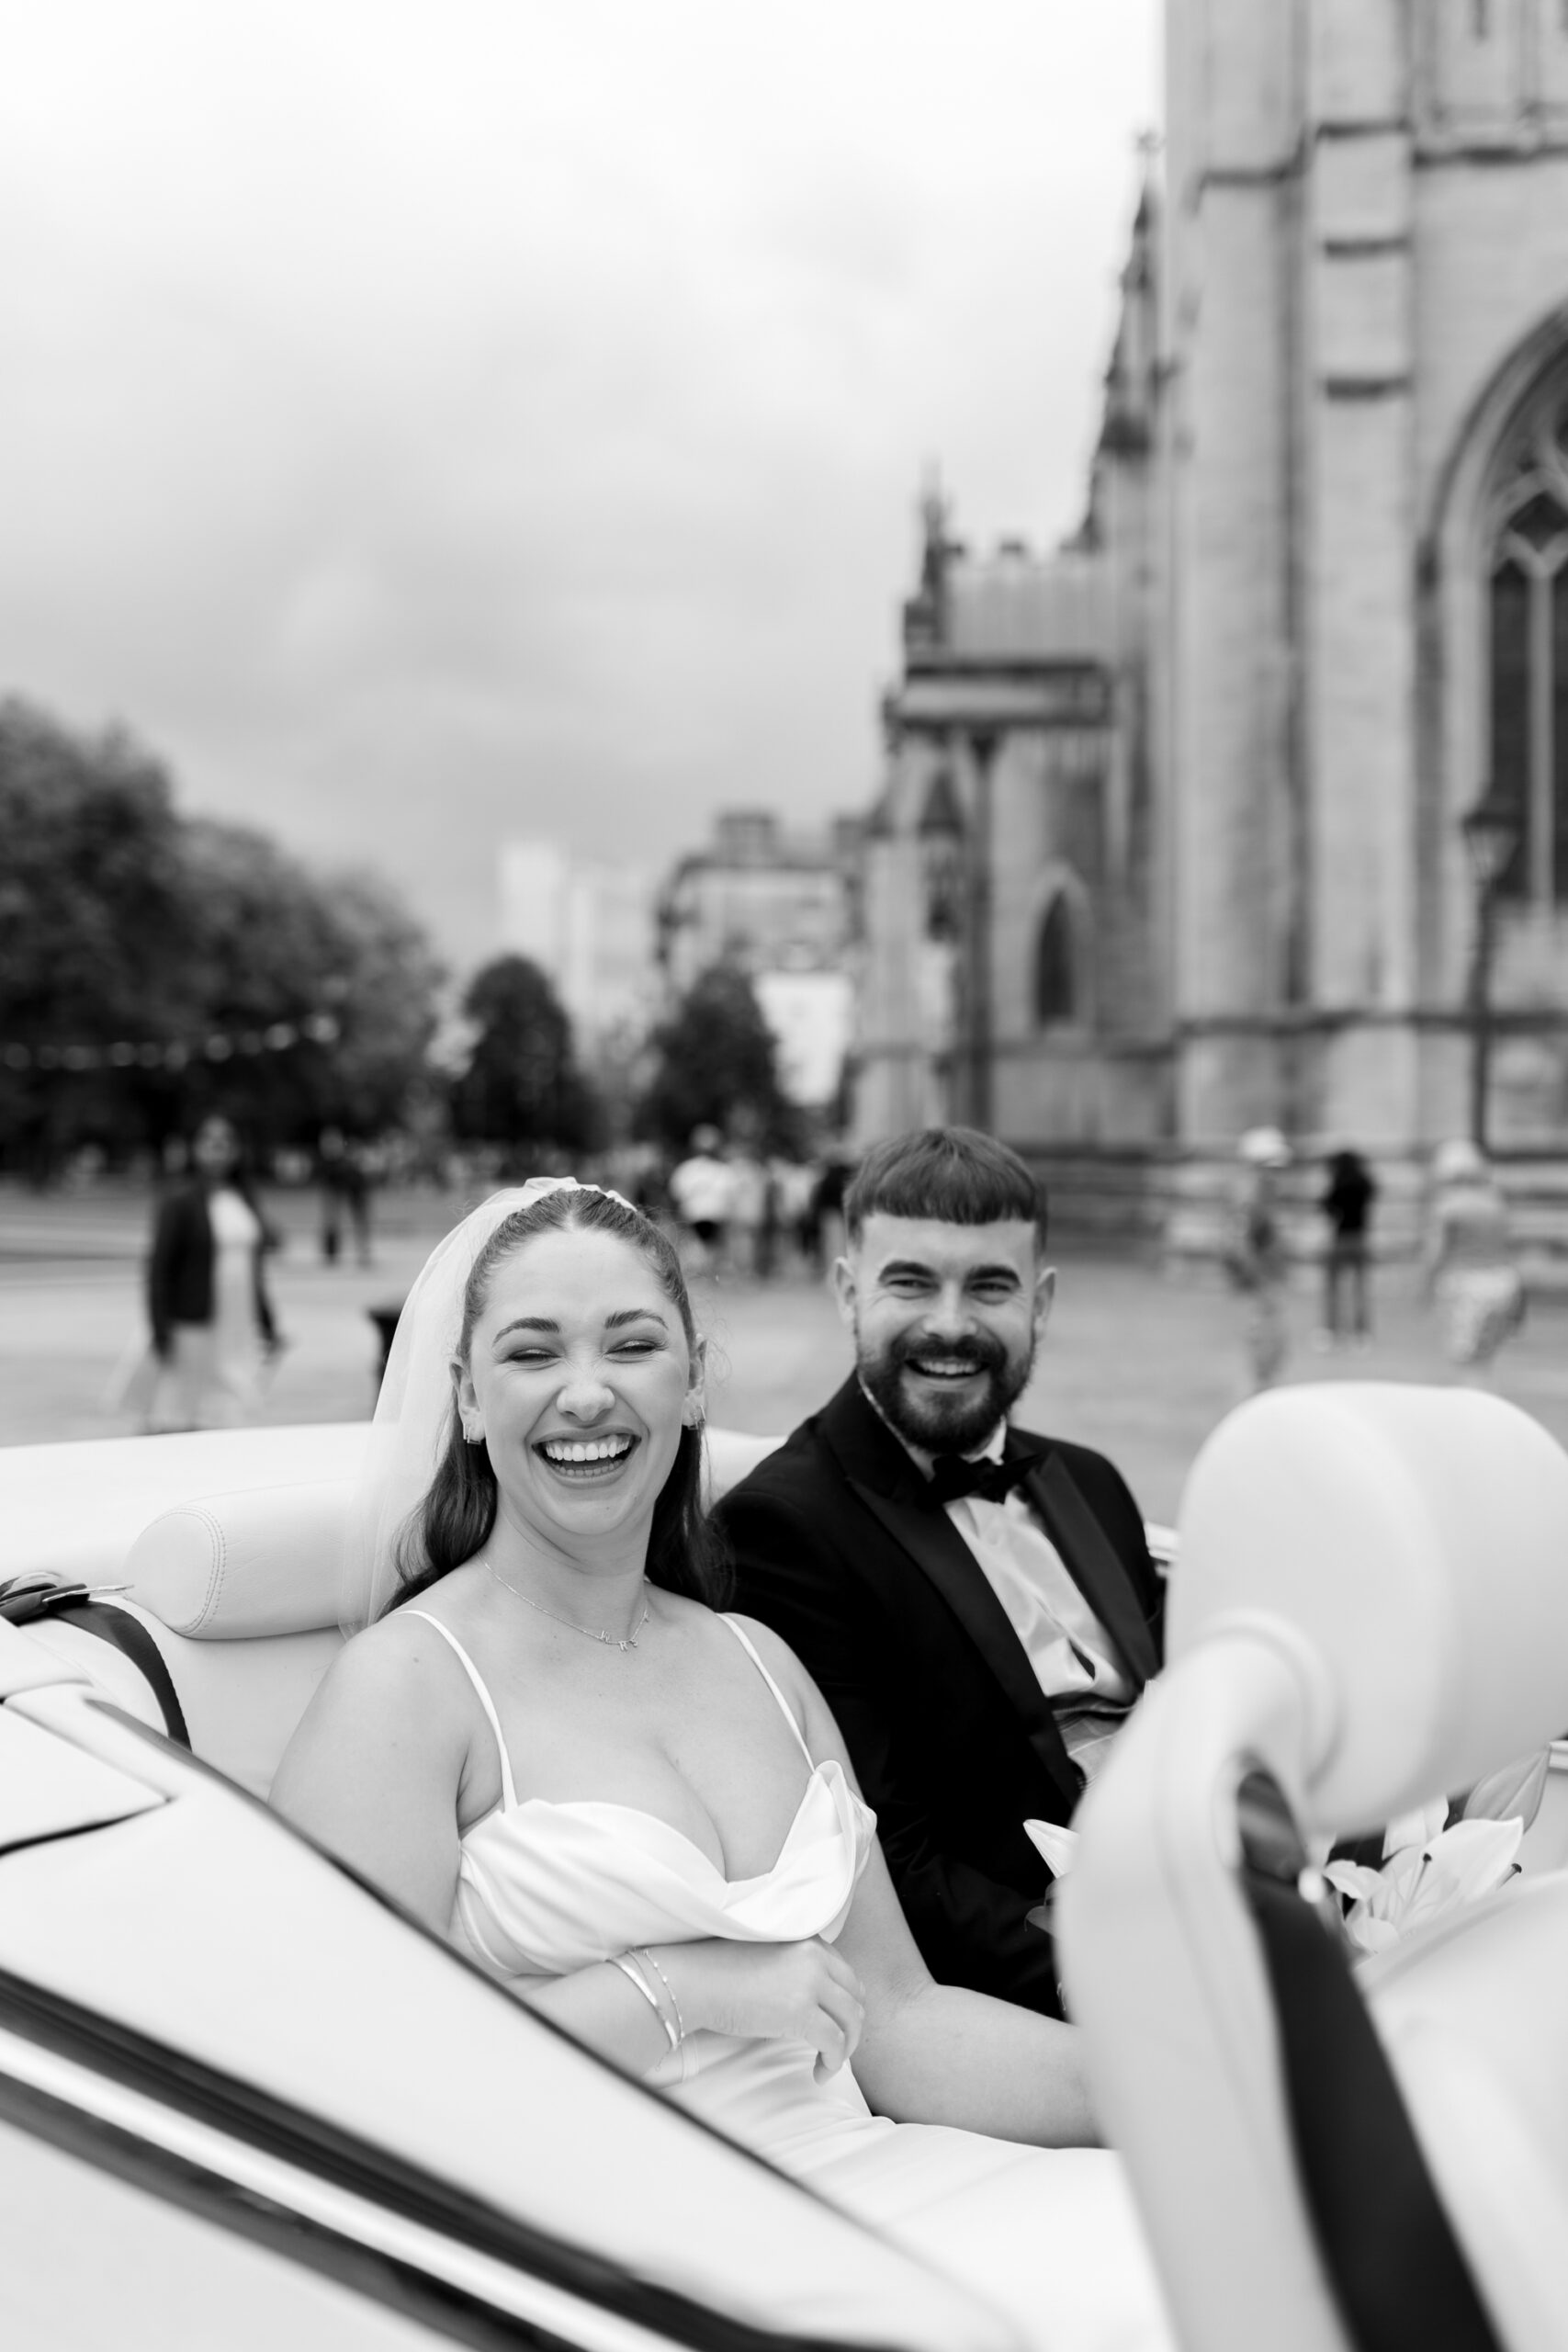 A black and white couple portrait in a classic vintage wedding car